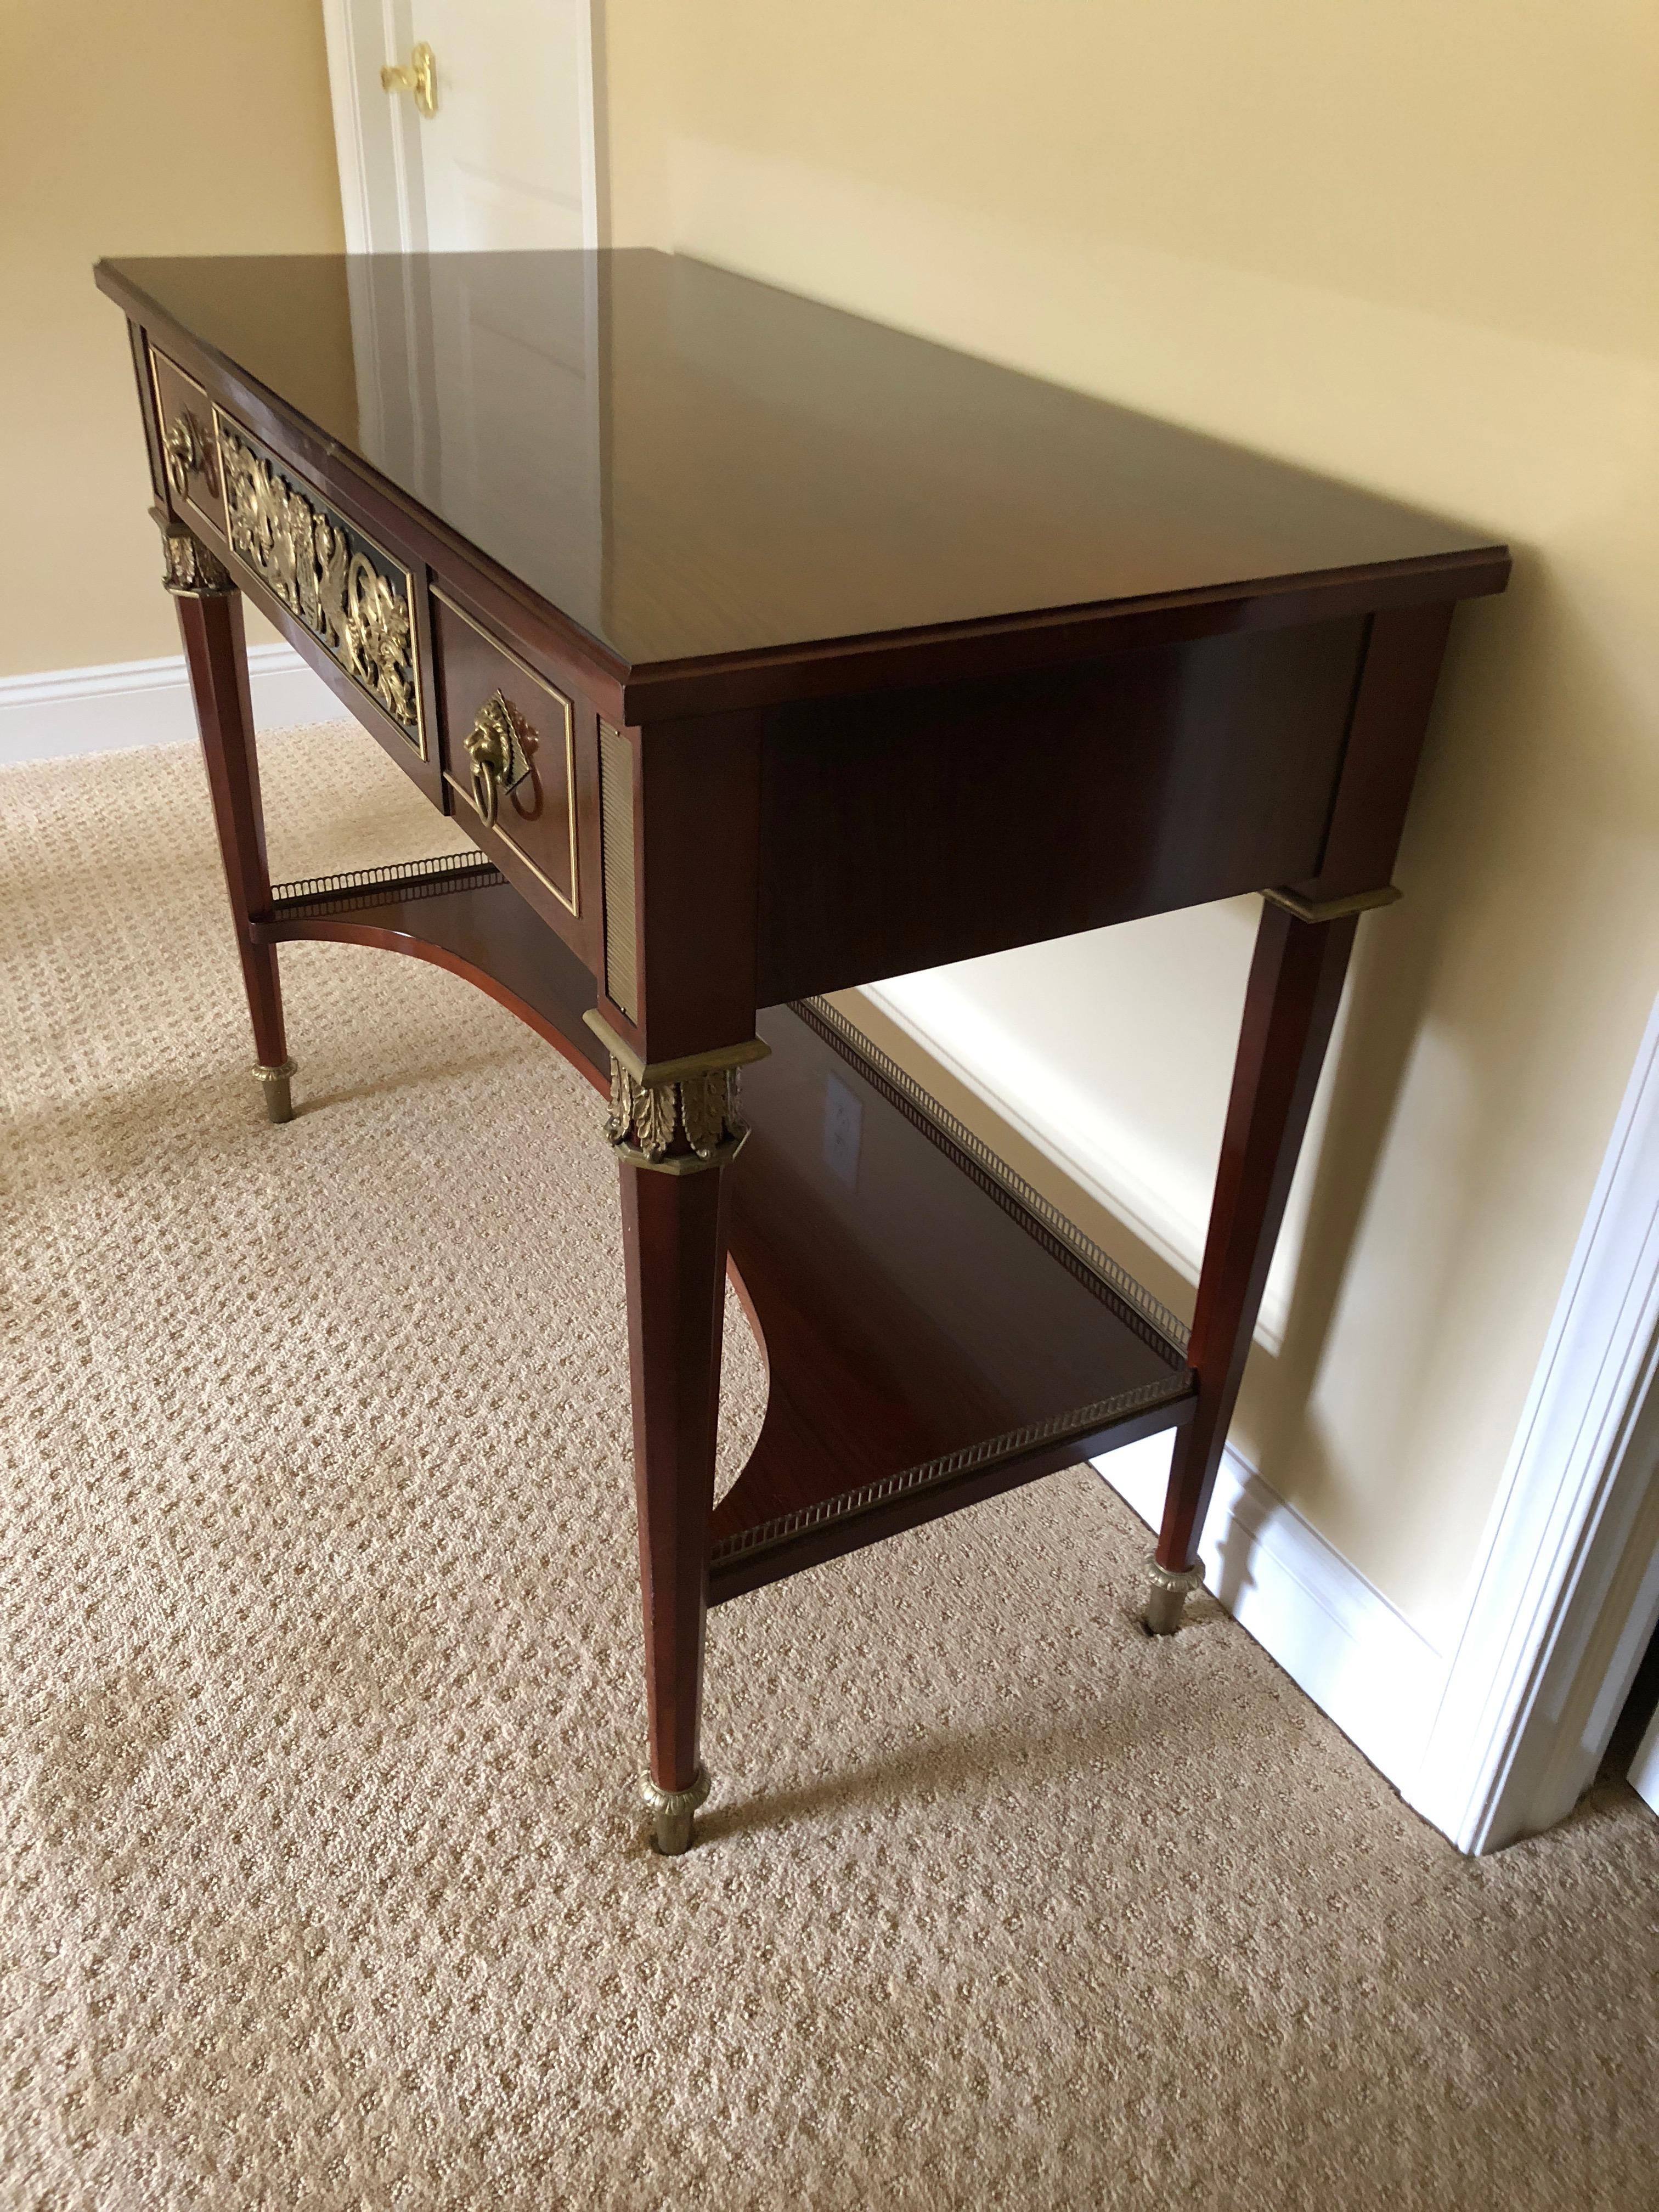 A very rich mahogany neoclassical style console table beautifully crafted by John Widdicomb, having ebonized front centre drawer with gorgeous brass decoration flanked by two smaller drawers with handsome lion head hardware. A second lower tier has